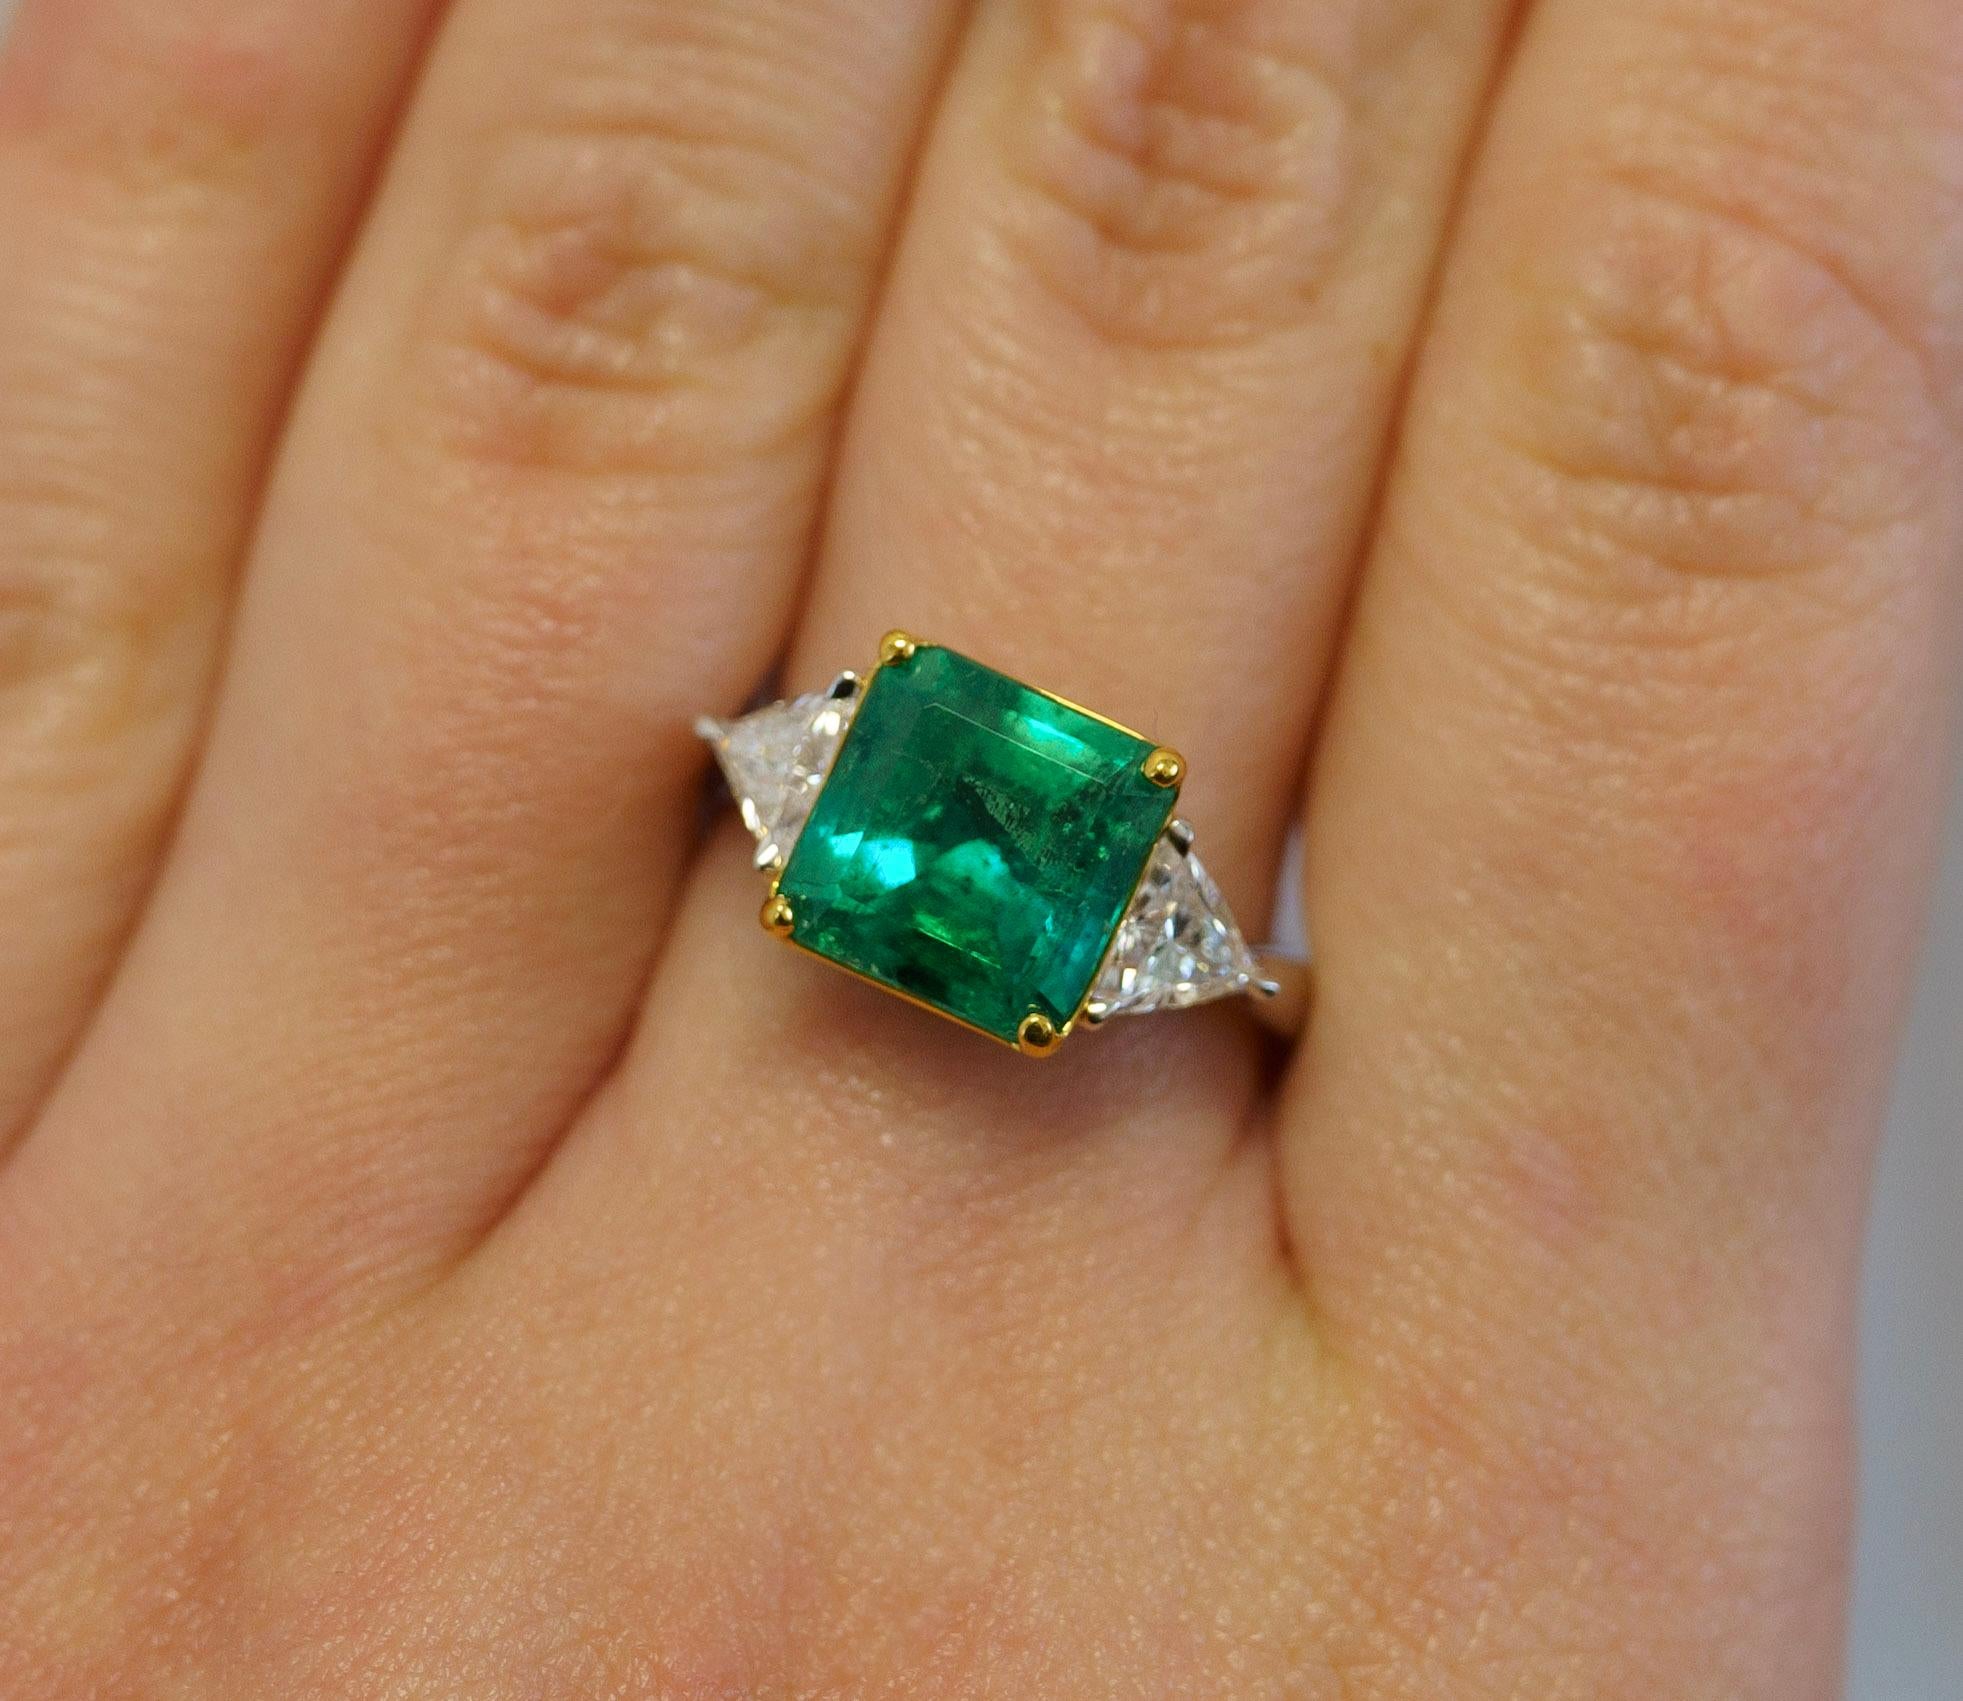 Natural 3.76 Carat Colombian Emerald with Trilliant Cut Diamond Side Stone 3-Stone Ring in 18K Gold. Complete with GRS and GIA certification.

The emerald center stone bears a rich deep green color saturation with minor-moderate oil treatment.